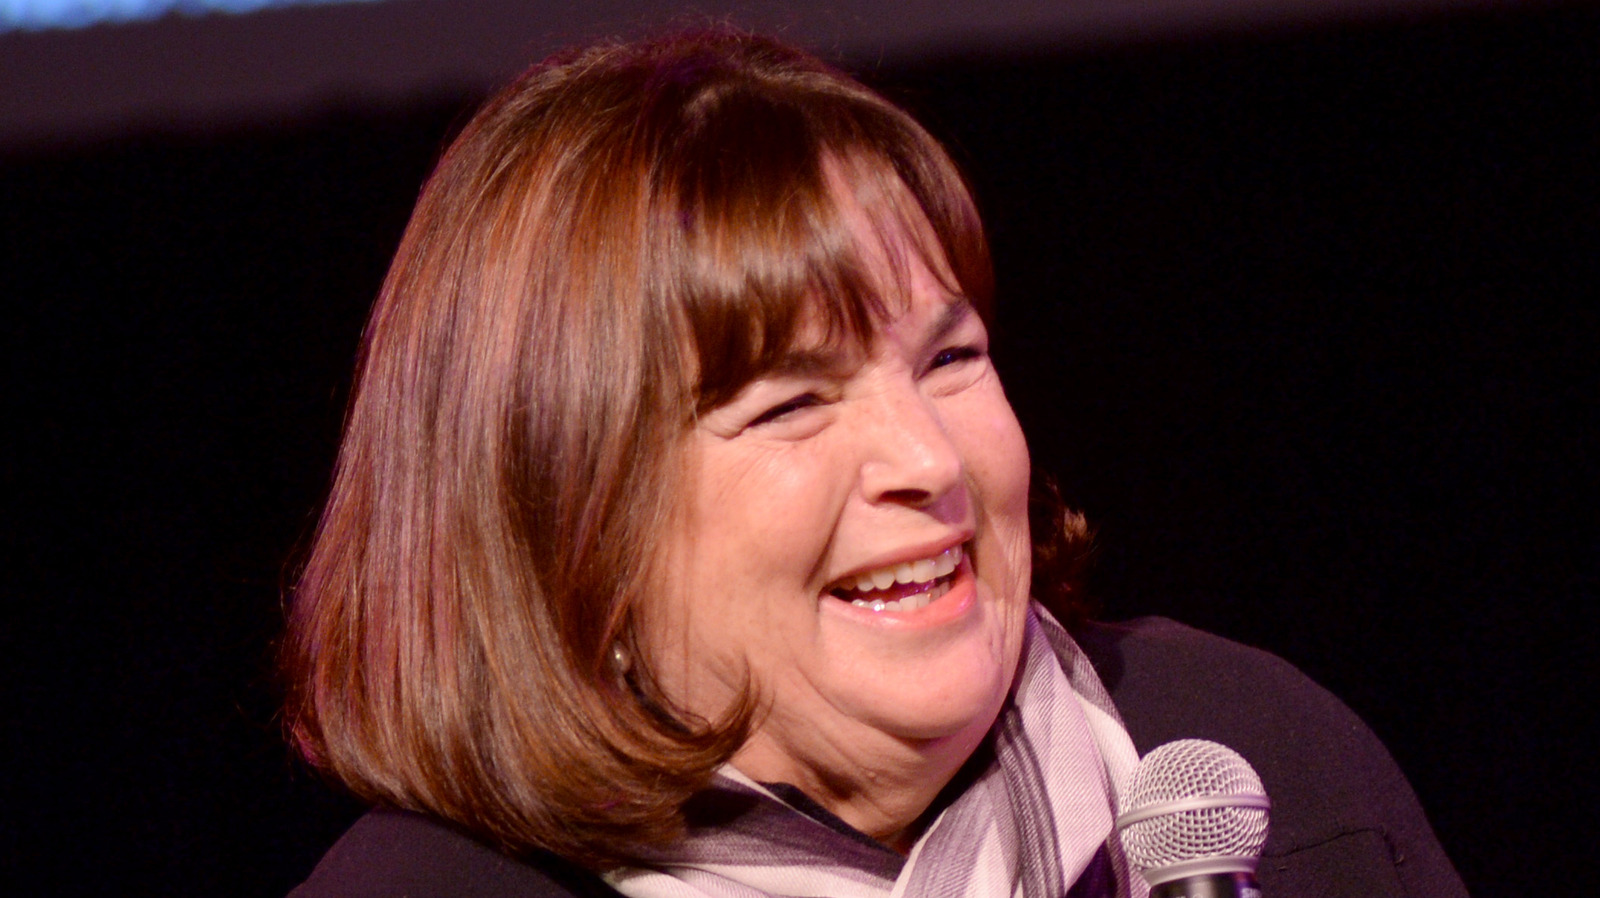 Why You Should Only Buy Small Chickens, According to Ina Garten